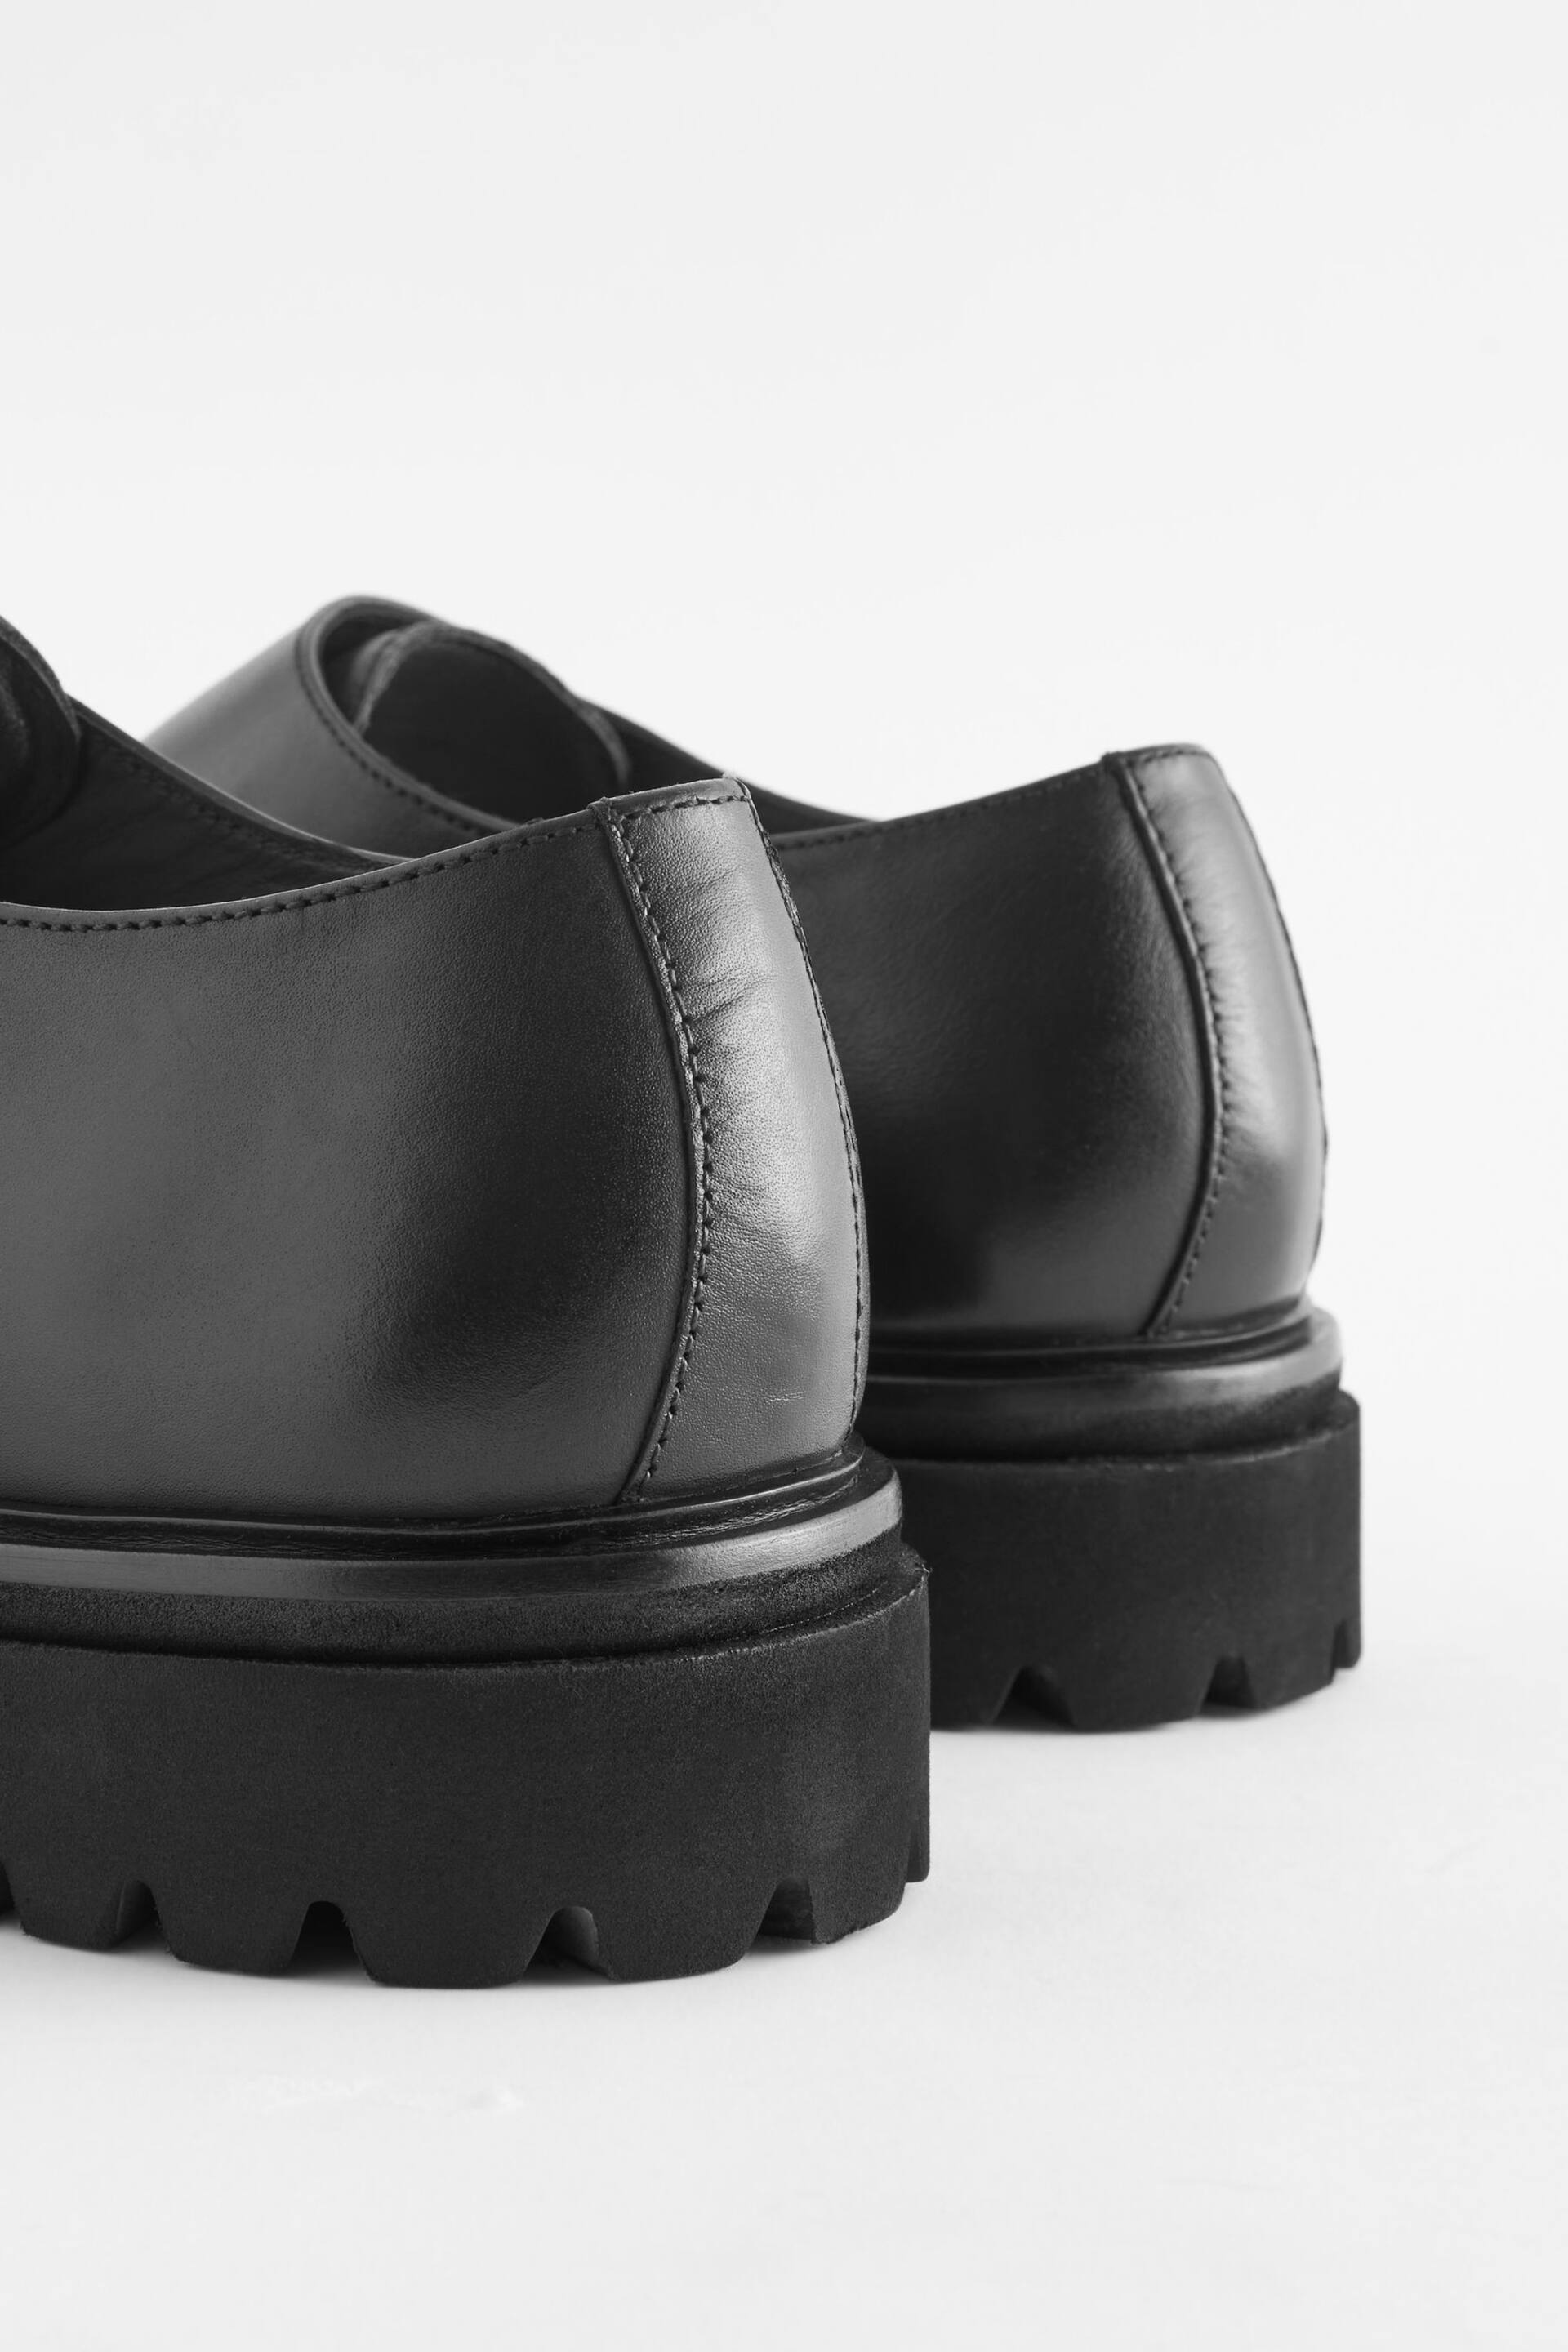 Black EDIT Cleated Leather Monk Shoes - Image 6 of 7